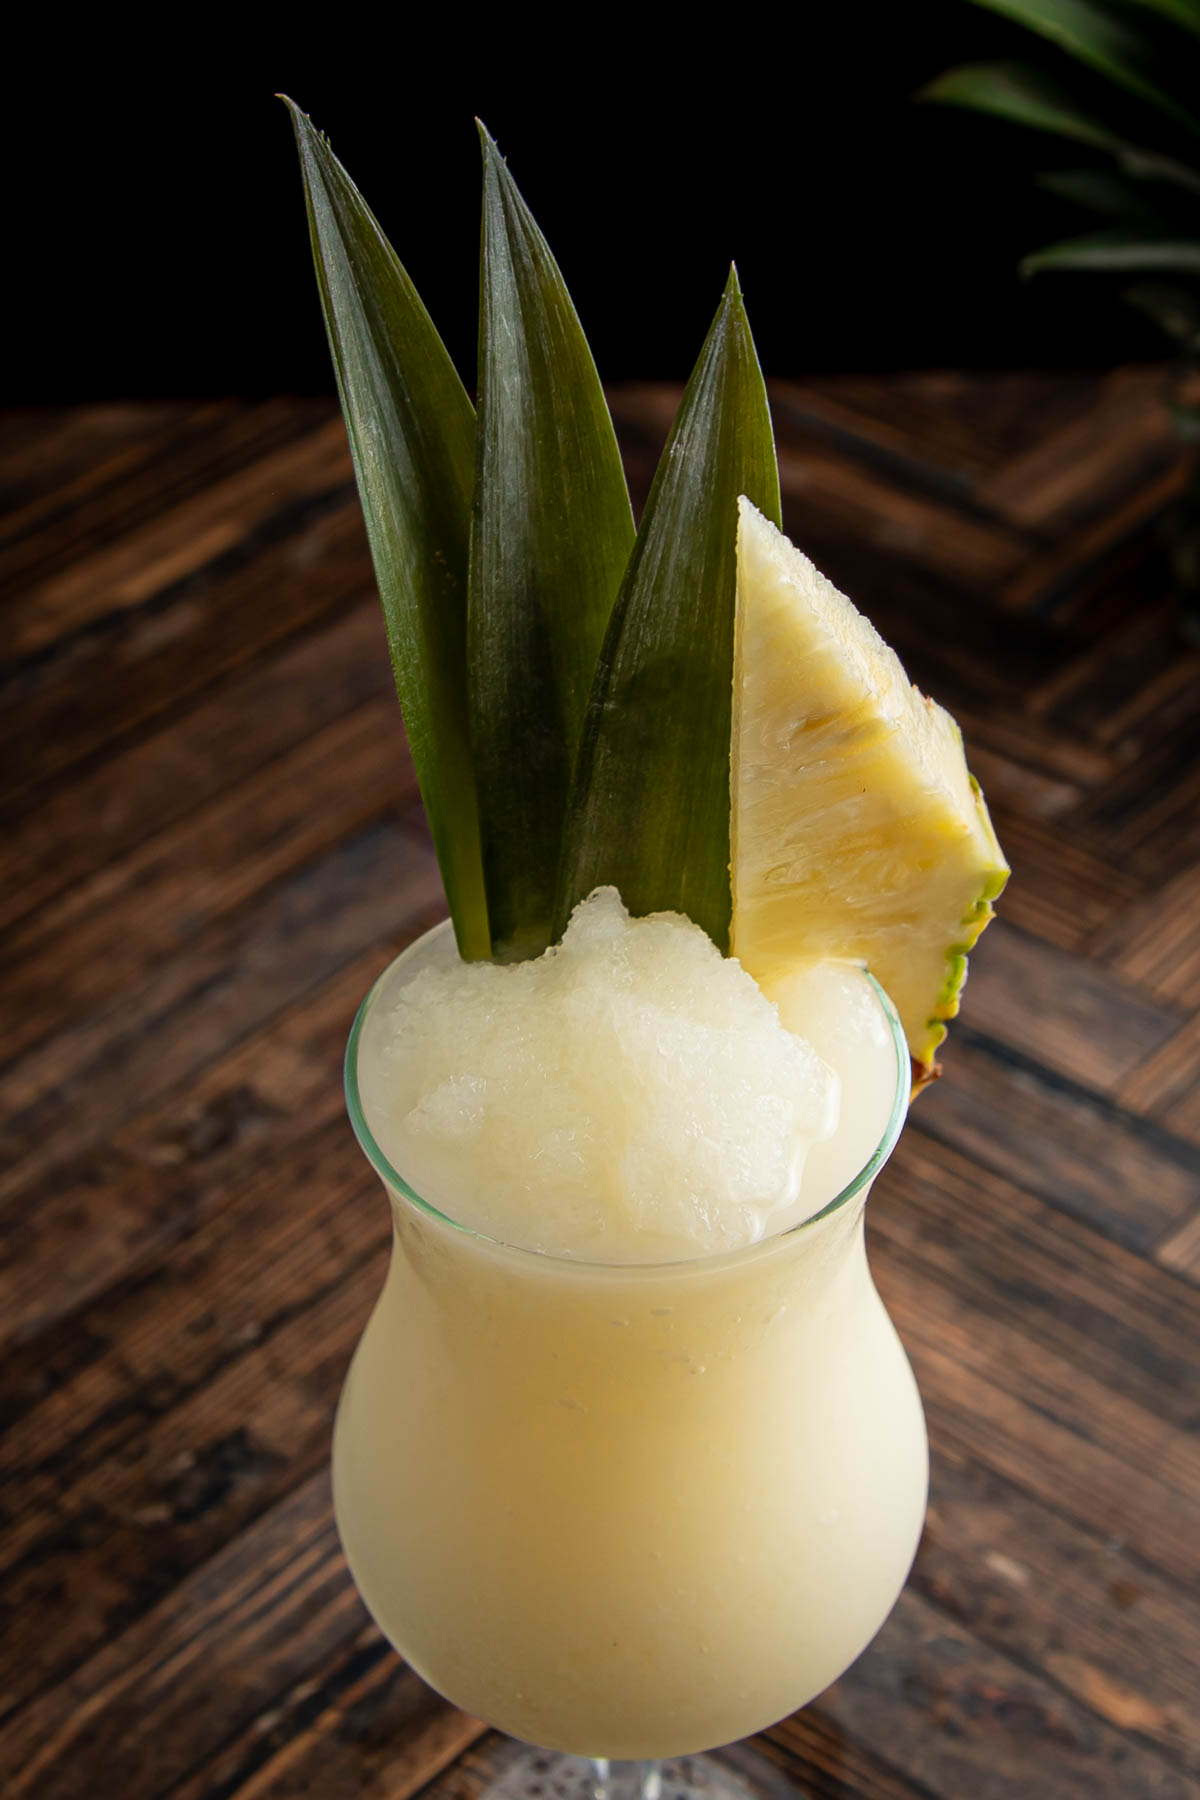 Top view of the virgin pina colada drink.